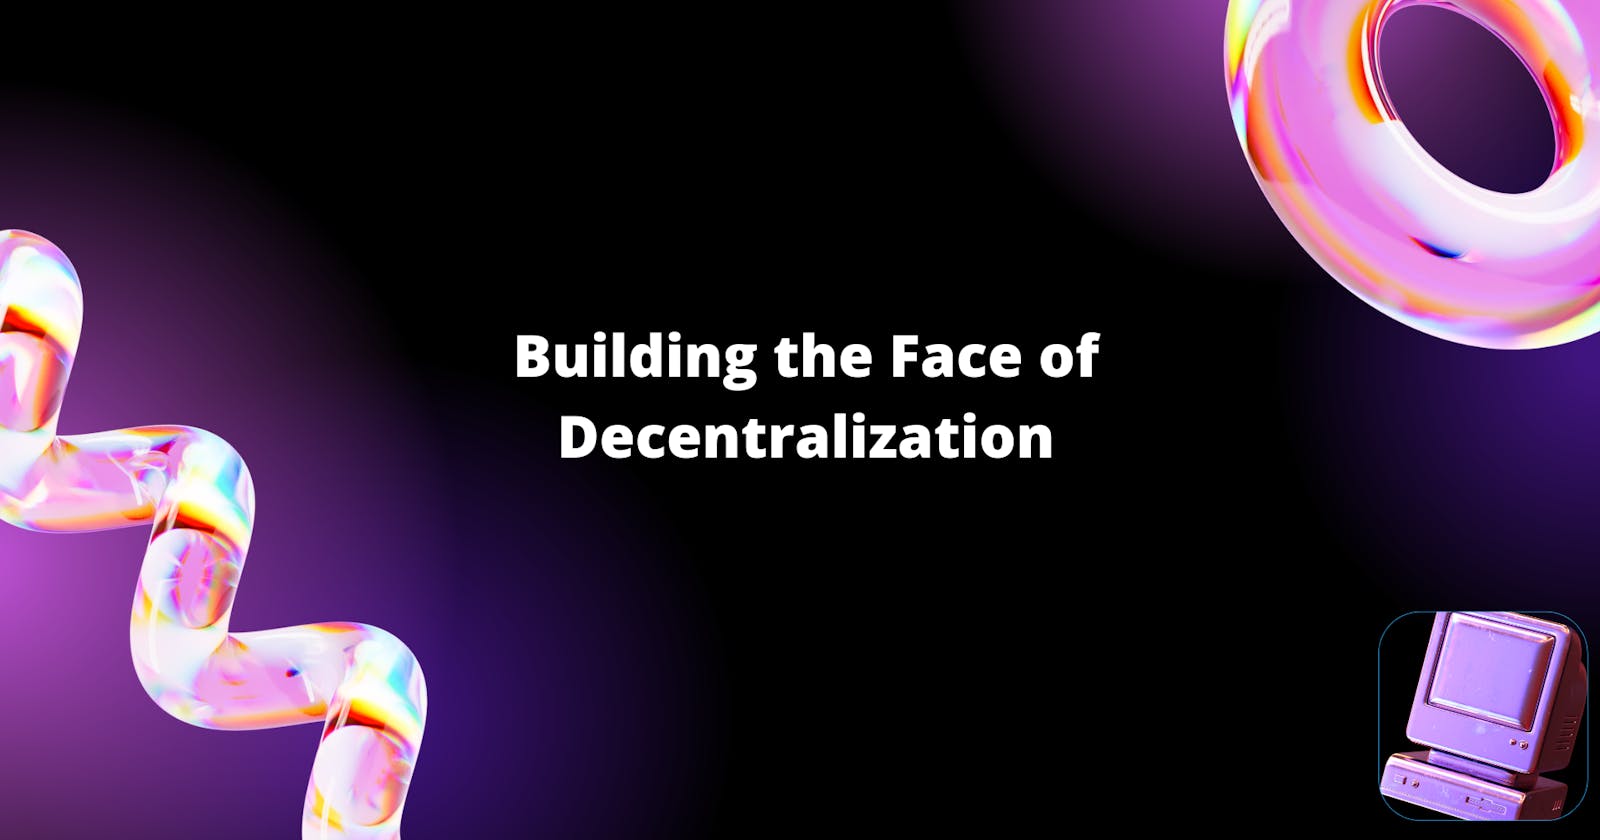 Building the Face of Decentralization